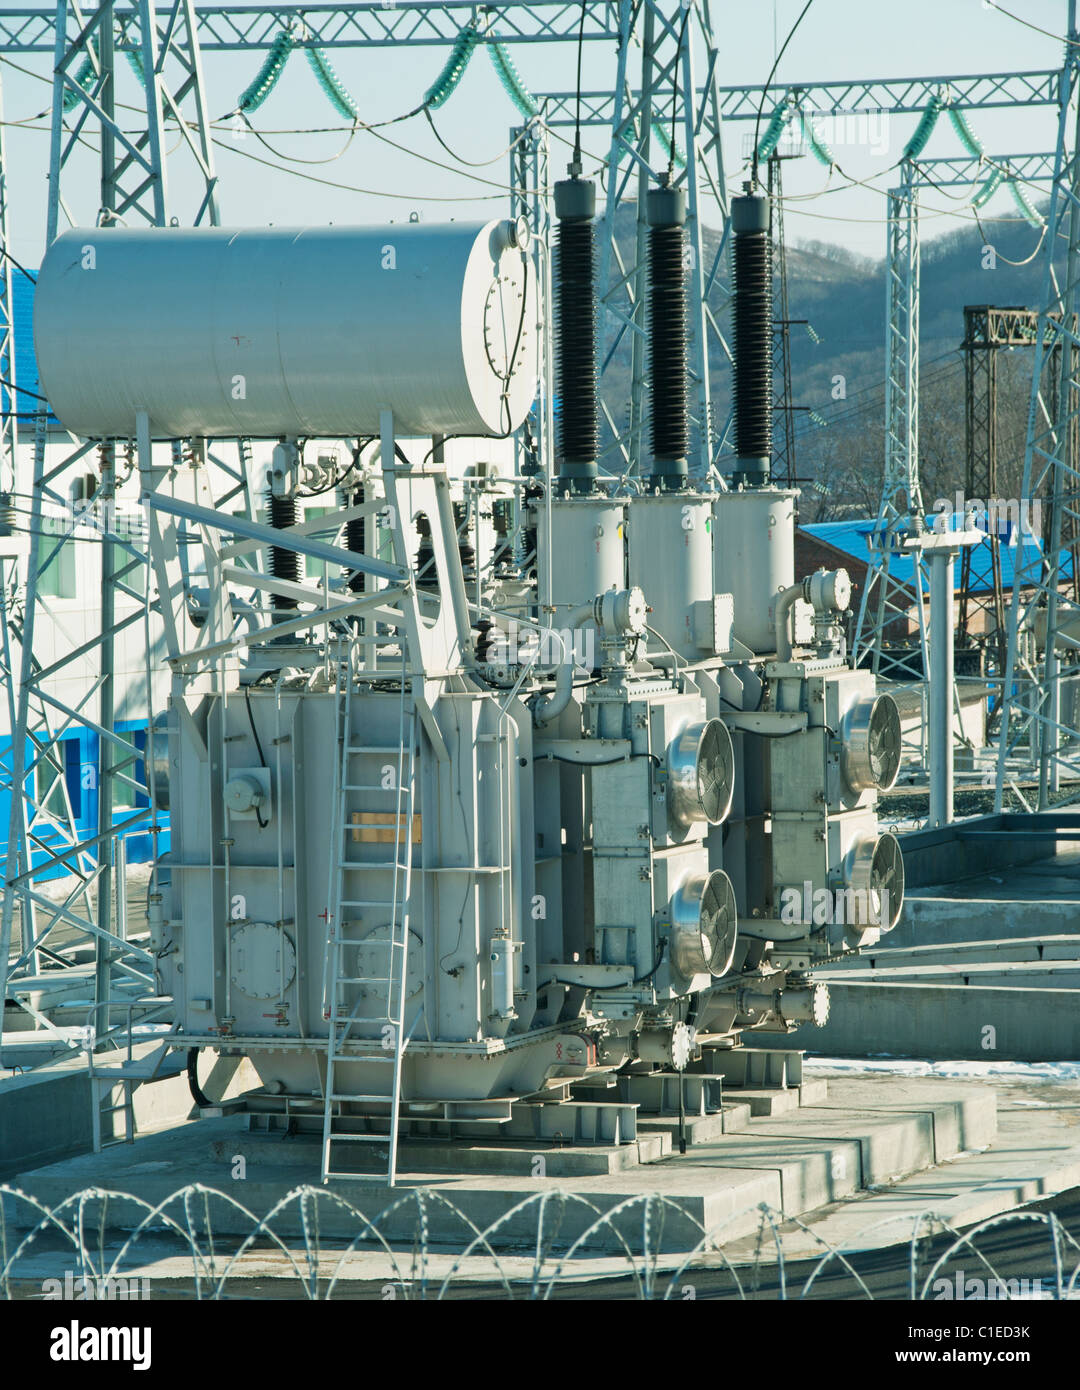 a hight voltage powerplant transformer on a switchyard Stock Photo